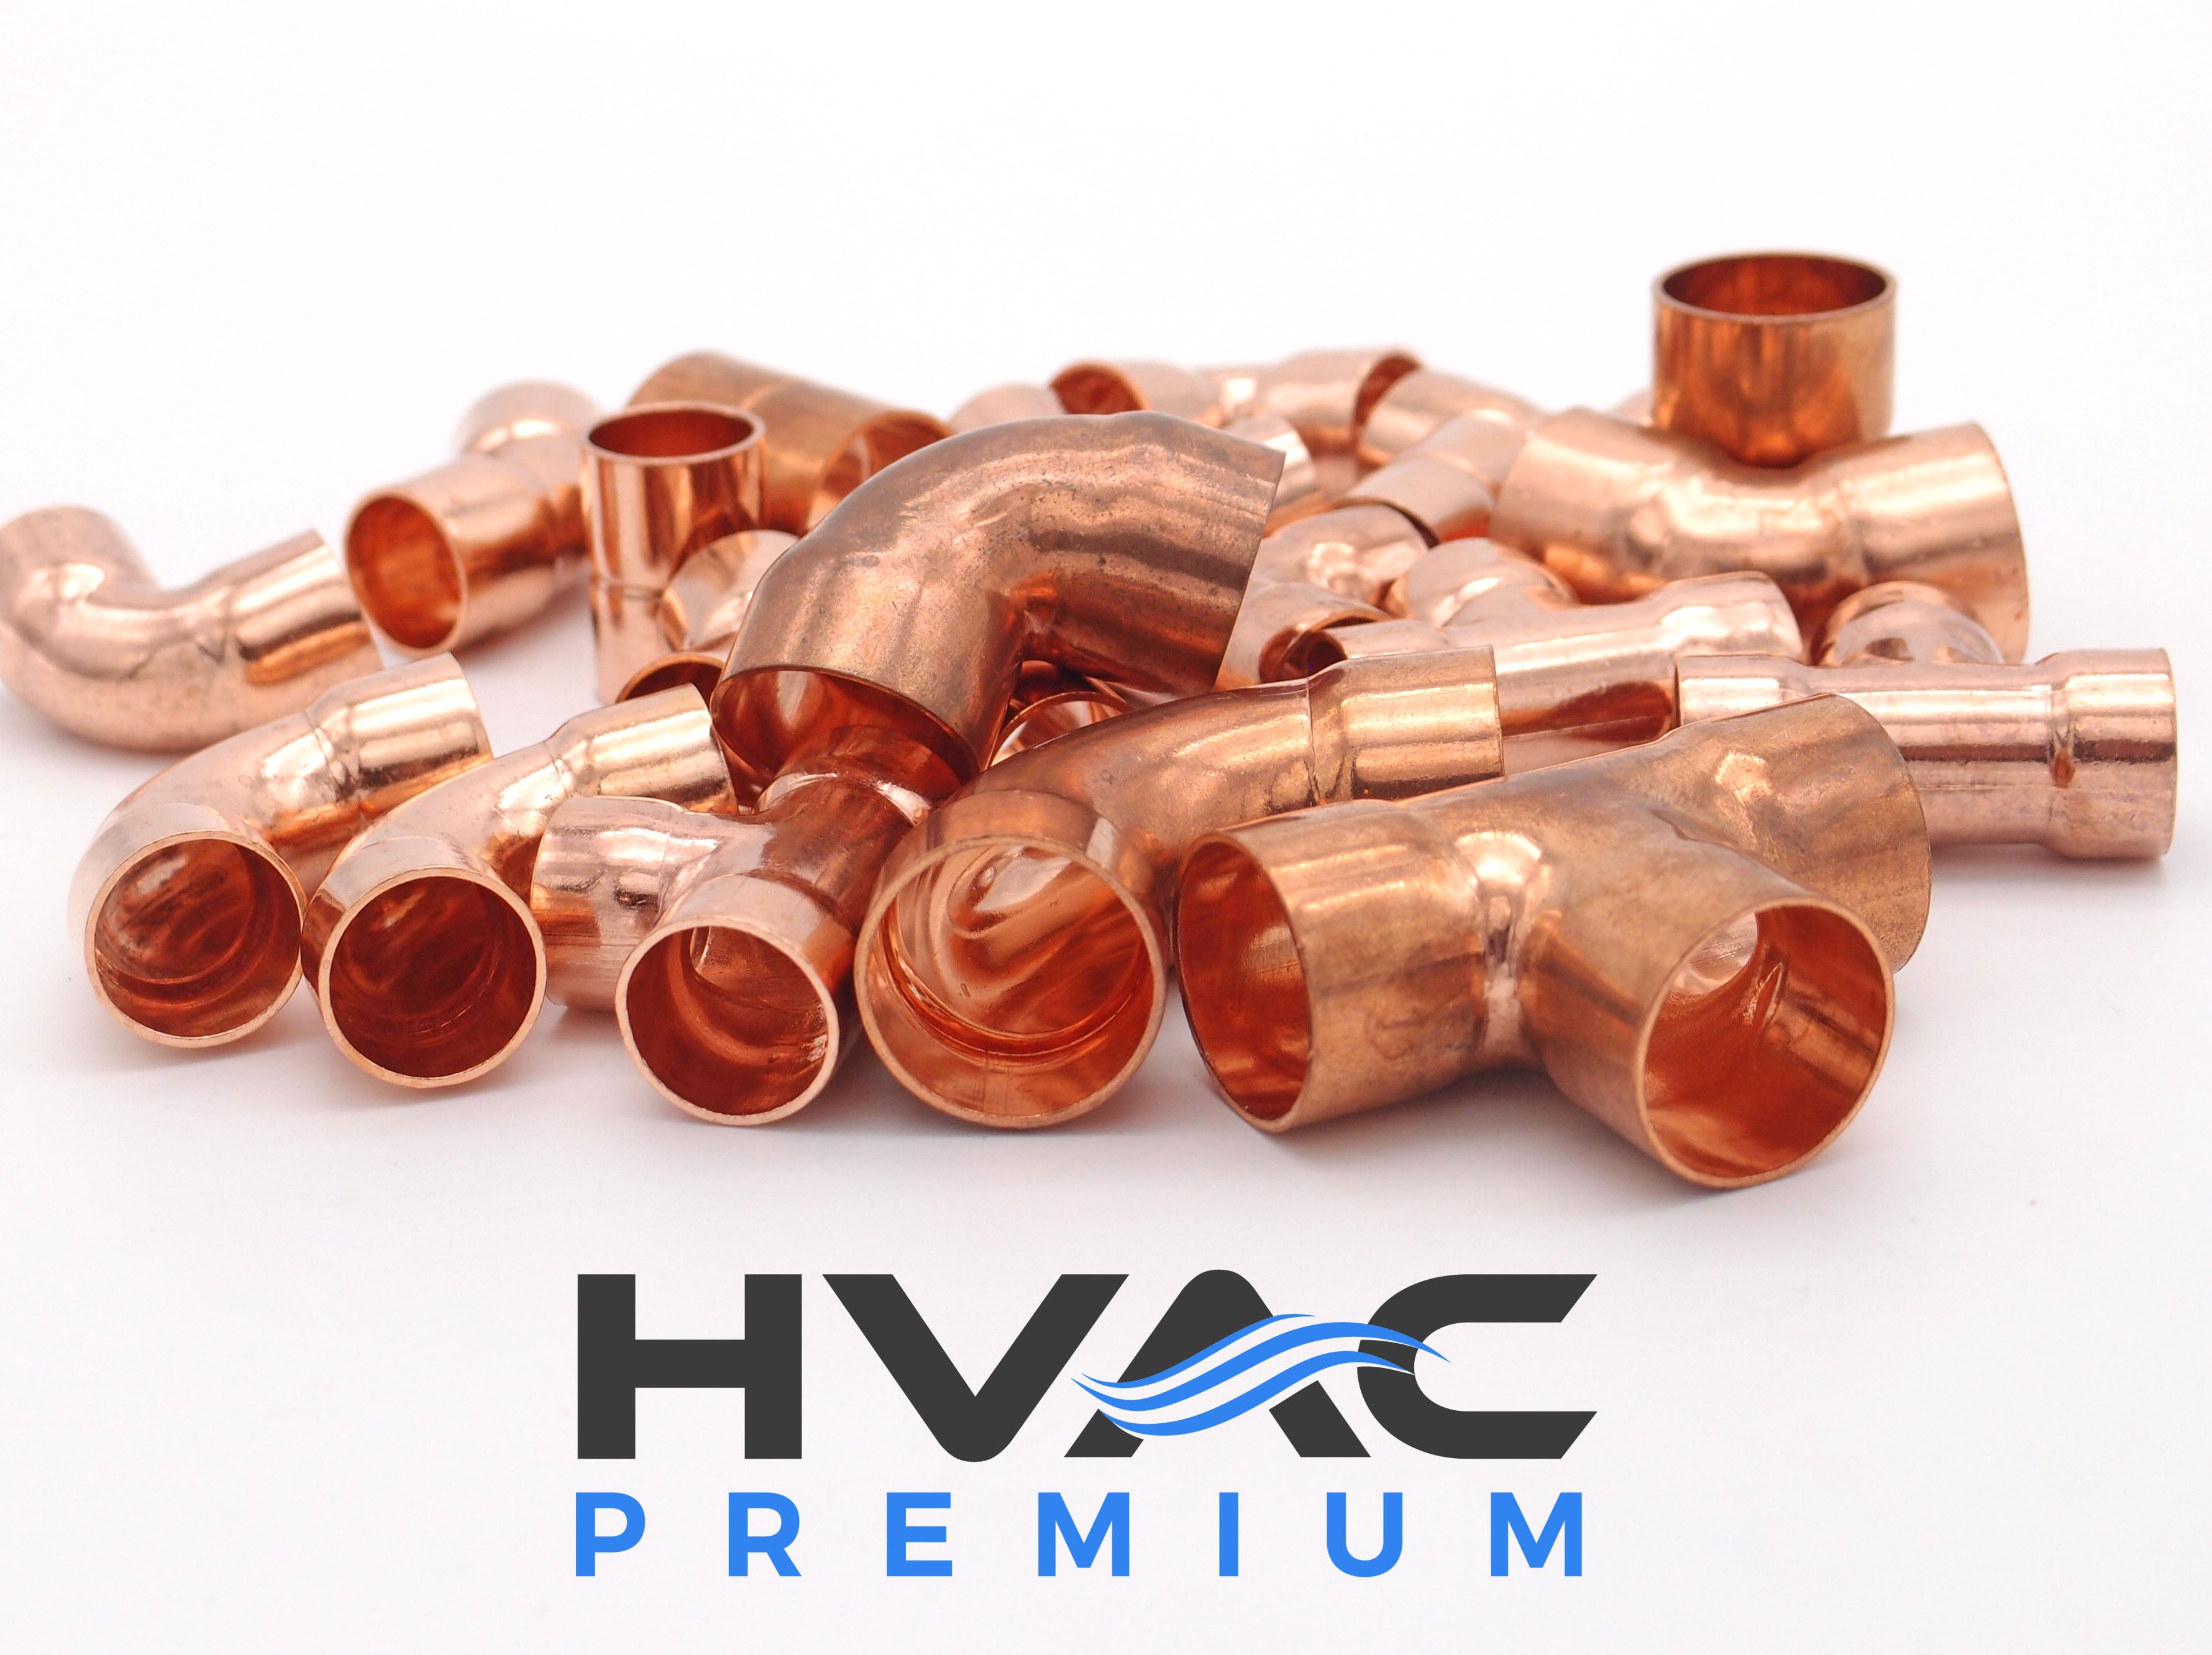 Copper Fitting 3/8 to 1/4 (HVAC Dimensions) Reducer / Increaser Copper Coupling & HVAC – 1/4 to 1/8 (Plumbing Inner Dimensions) 99.9% Pure Copper - 10 Pack